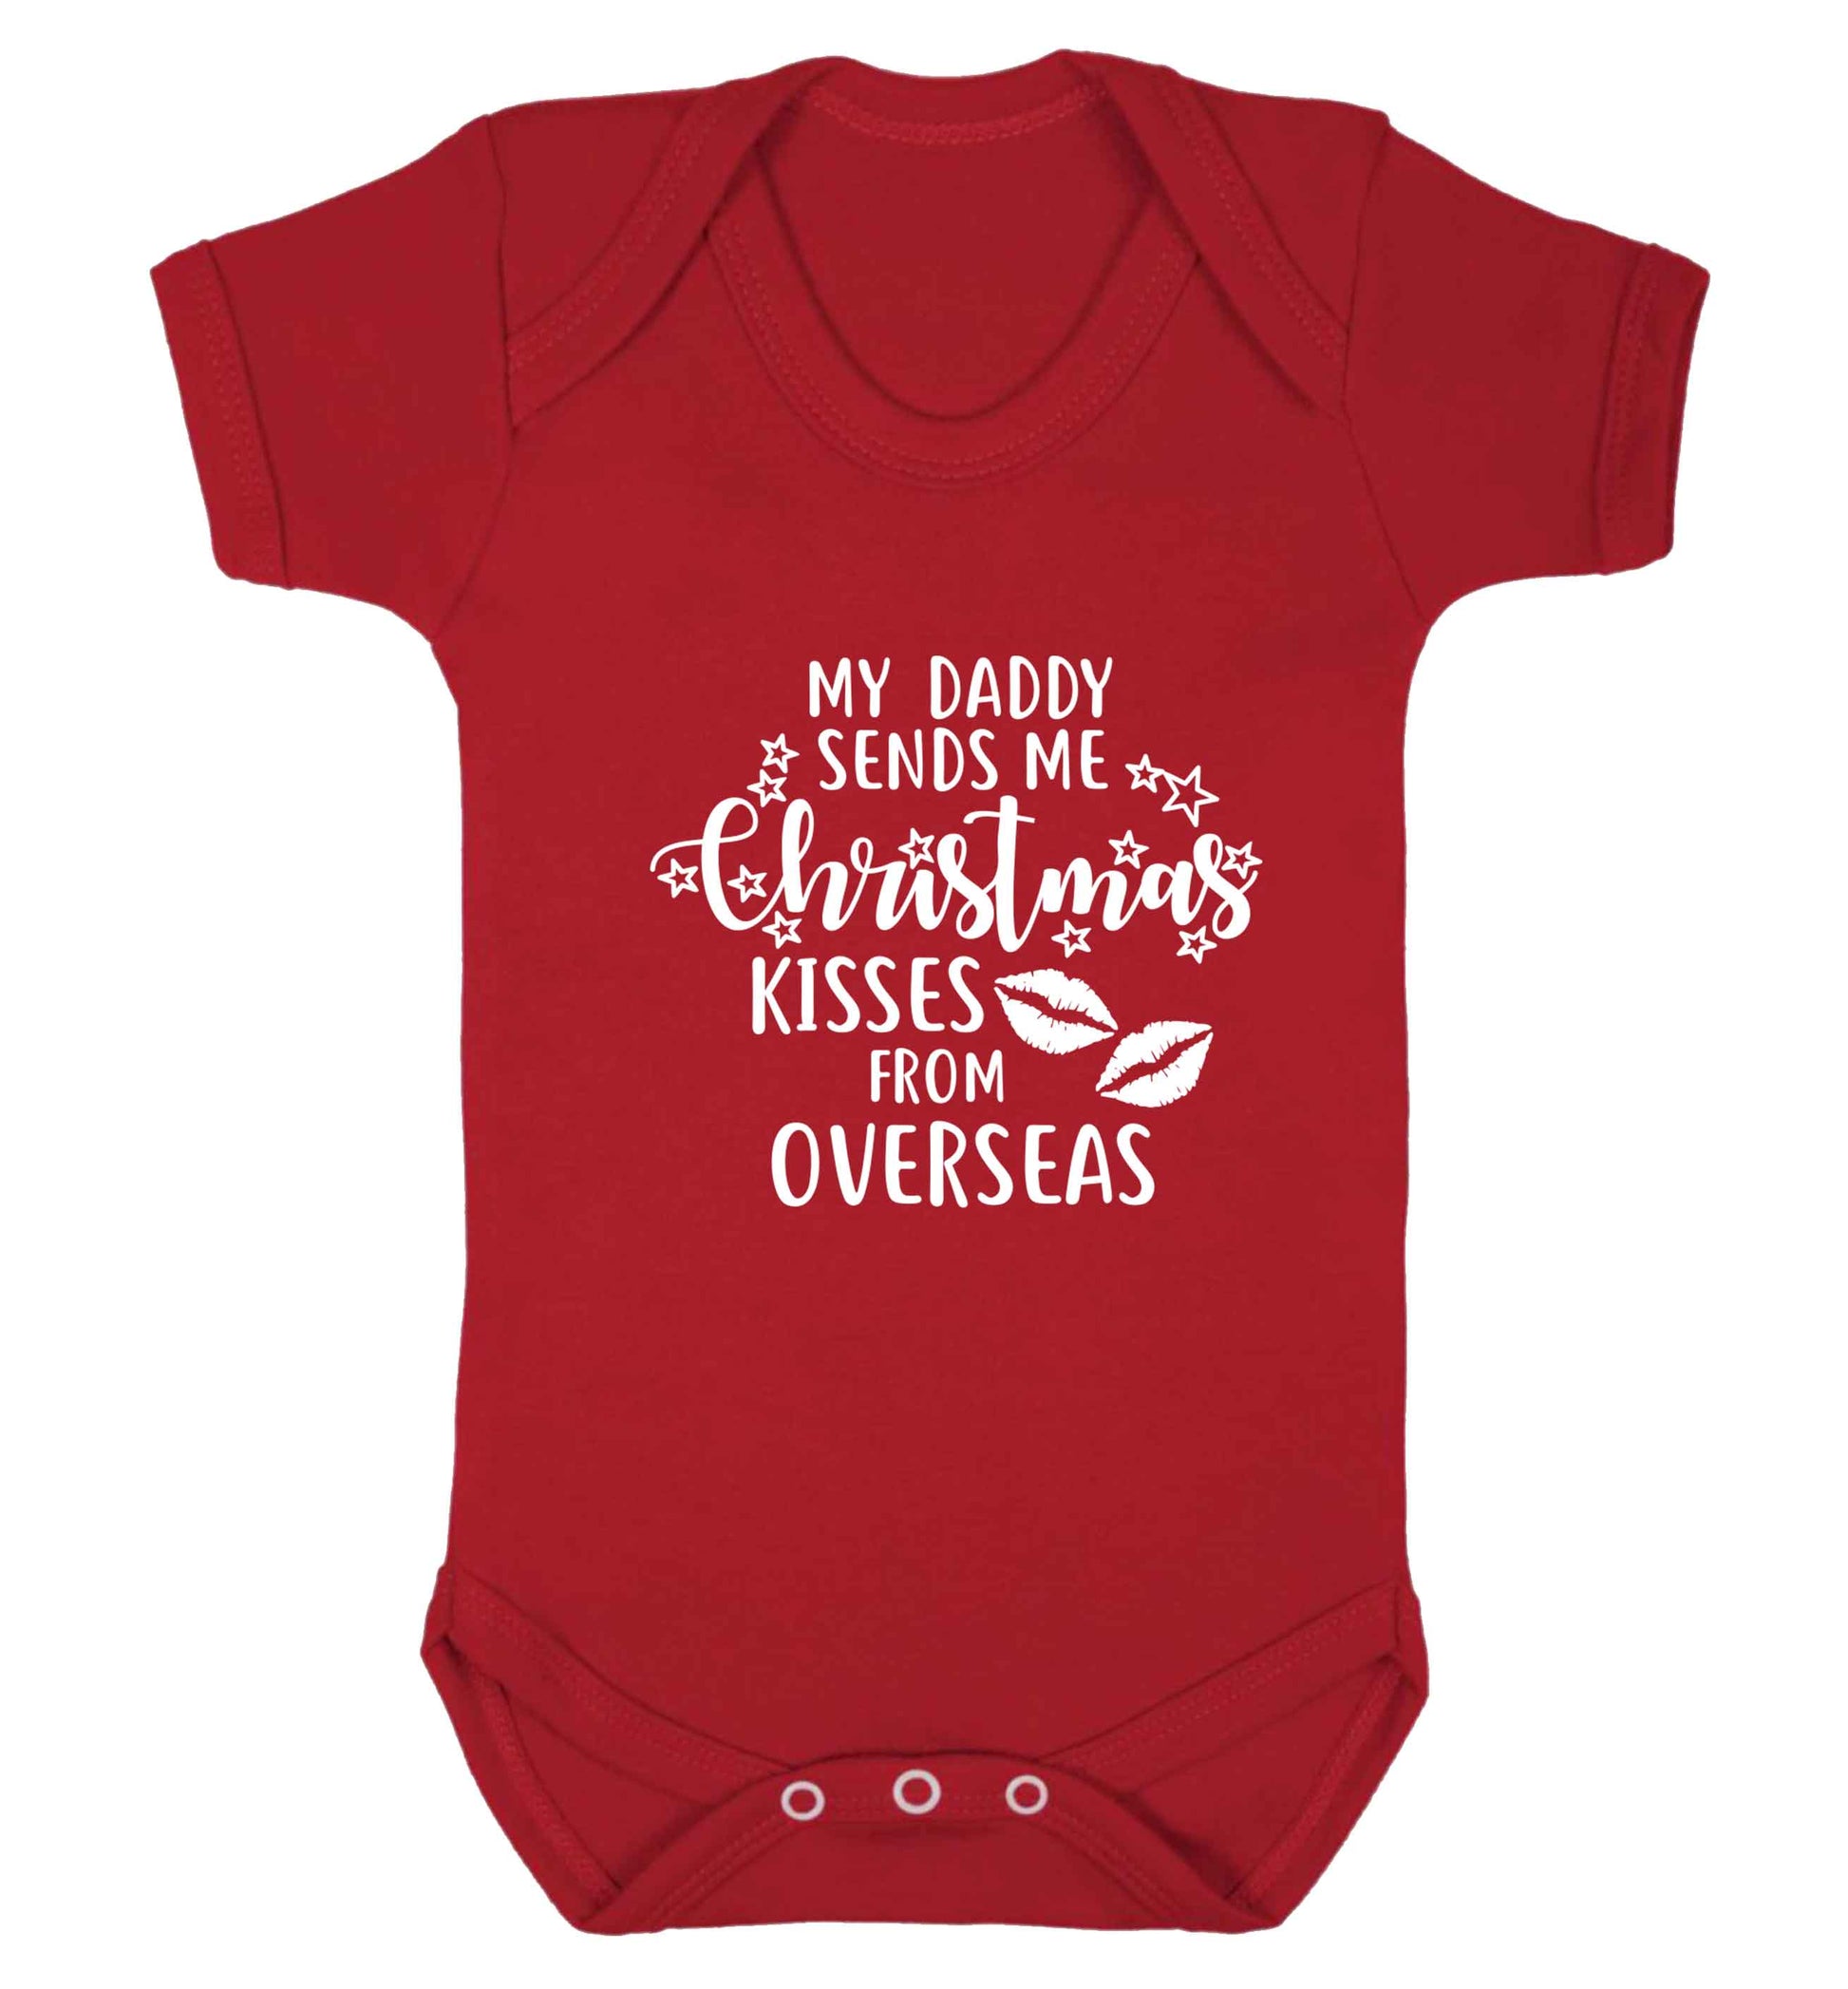 Daddy Christmas Kisses Overseas baby vest red 18-24 months